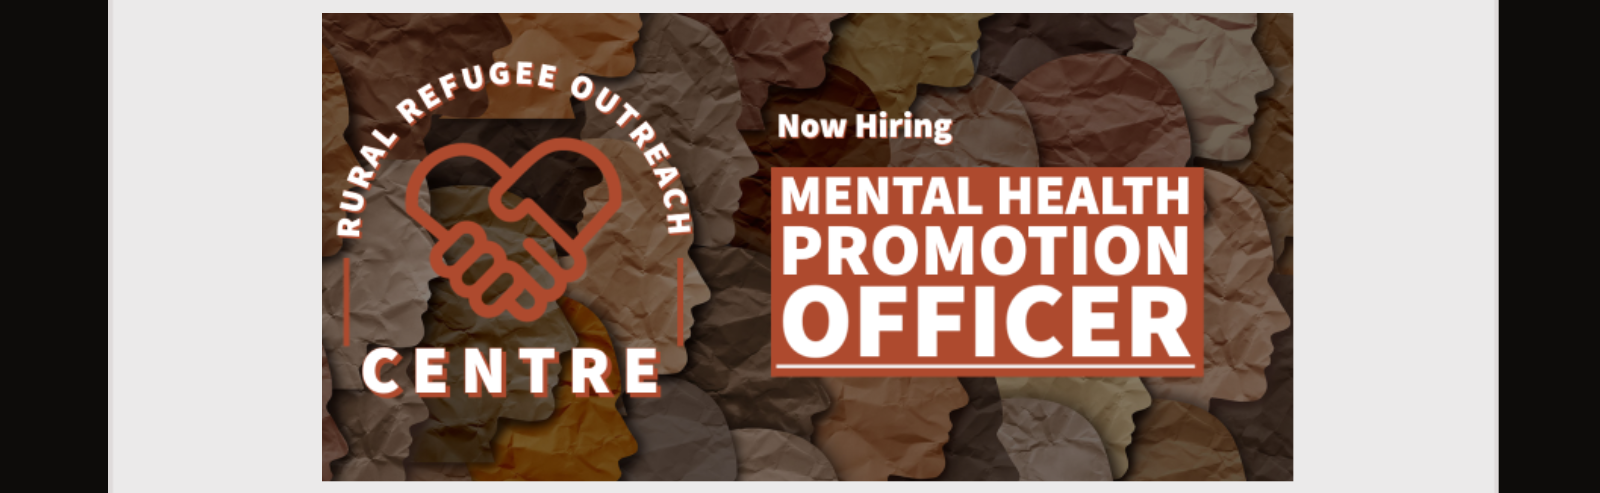 Last banner reads "Rural Refugee Outreach Centre. Now Hiring: Mental Health Promotion Officer"